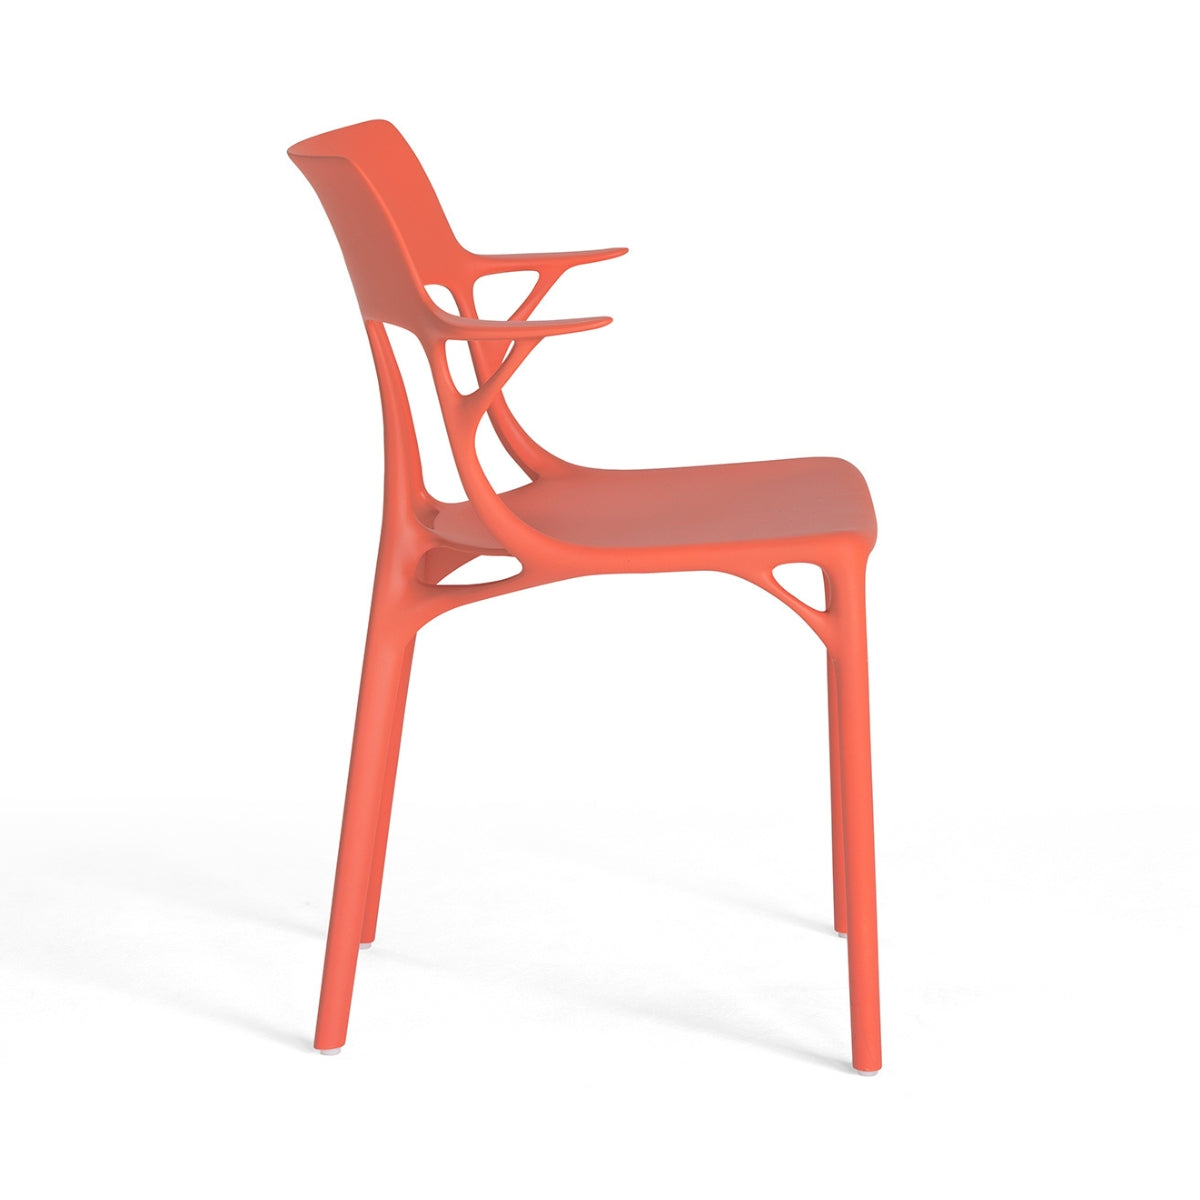 A.I. Chair - Kartell